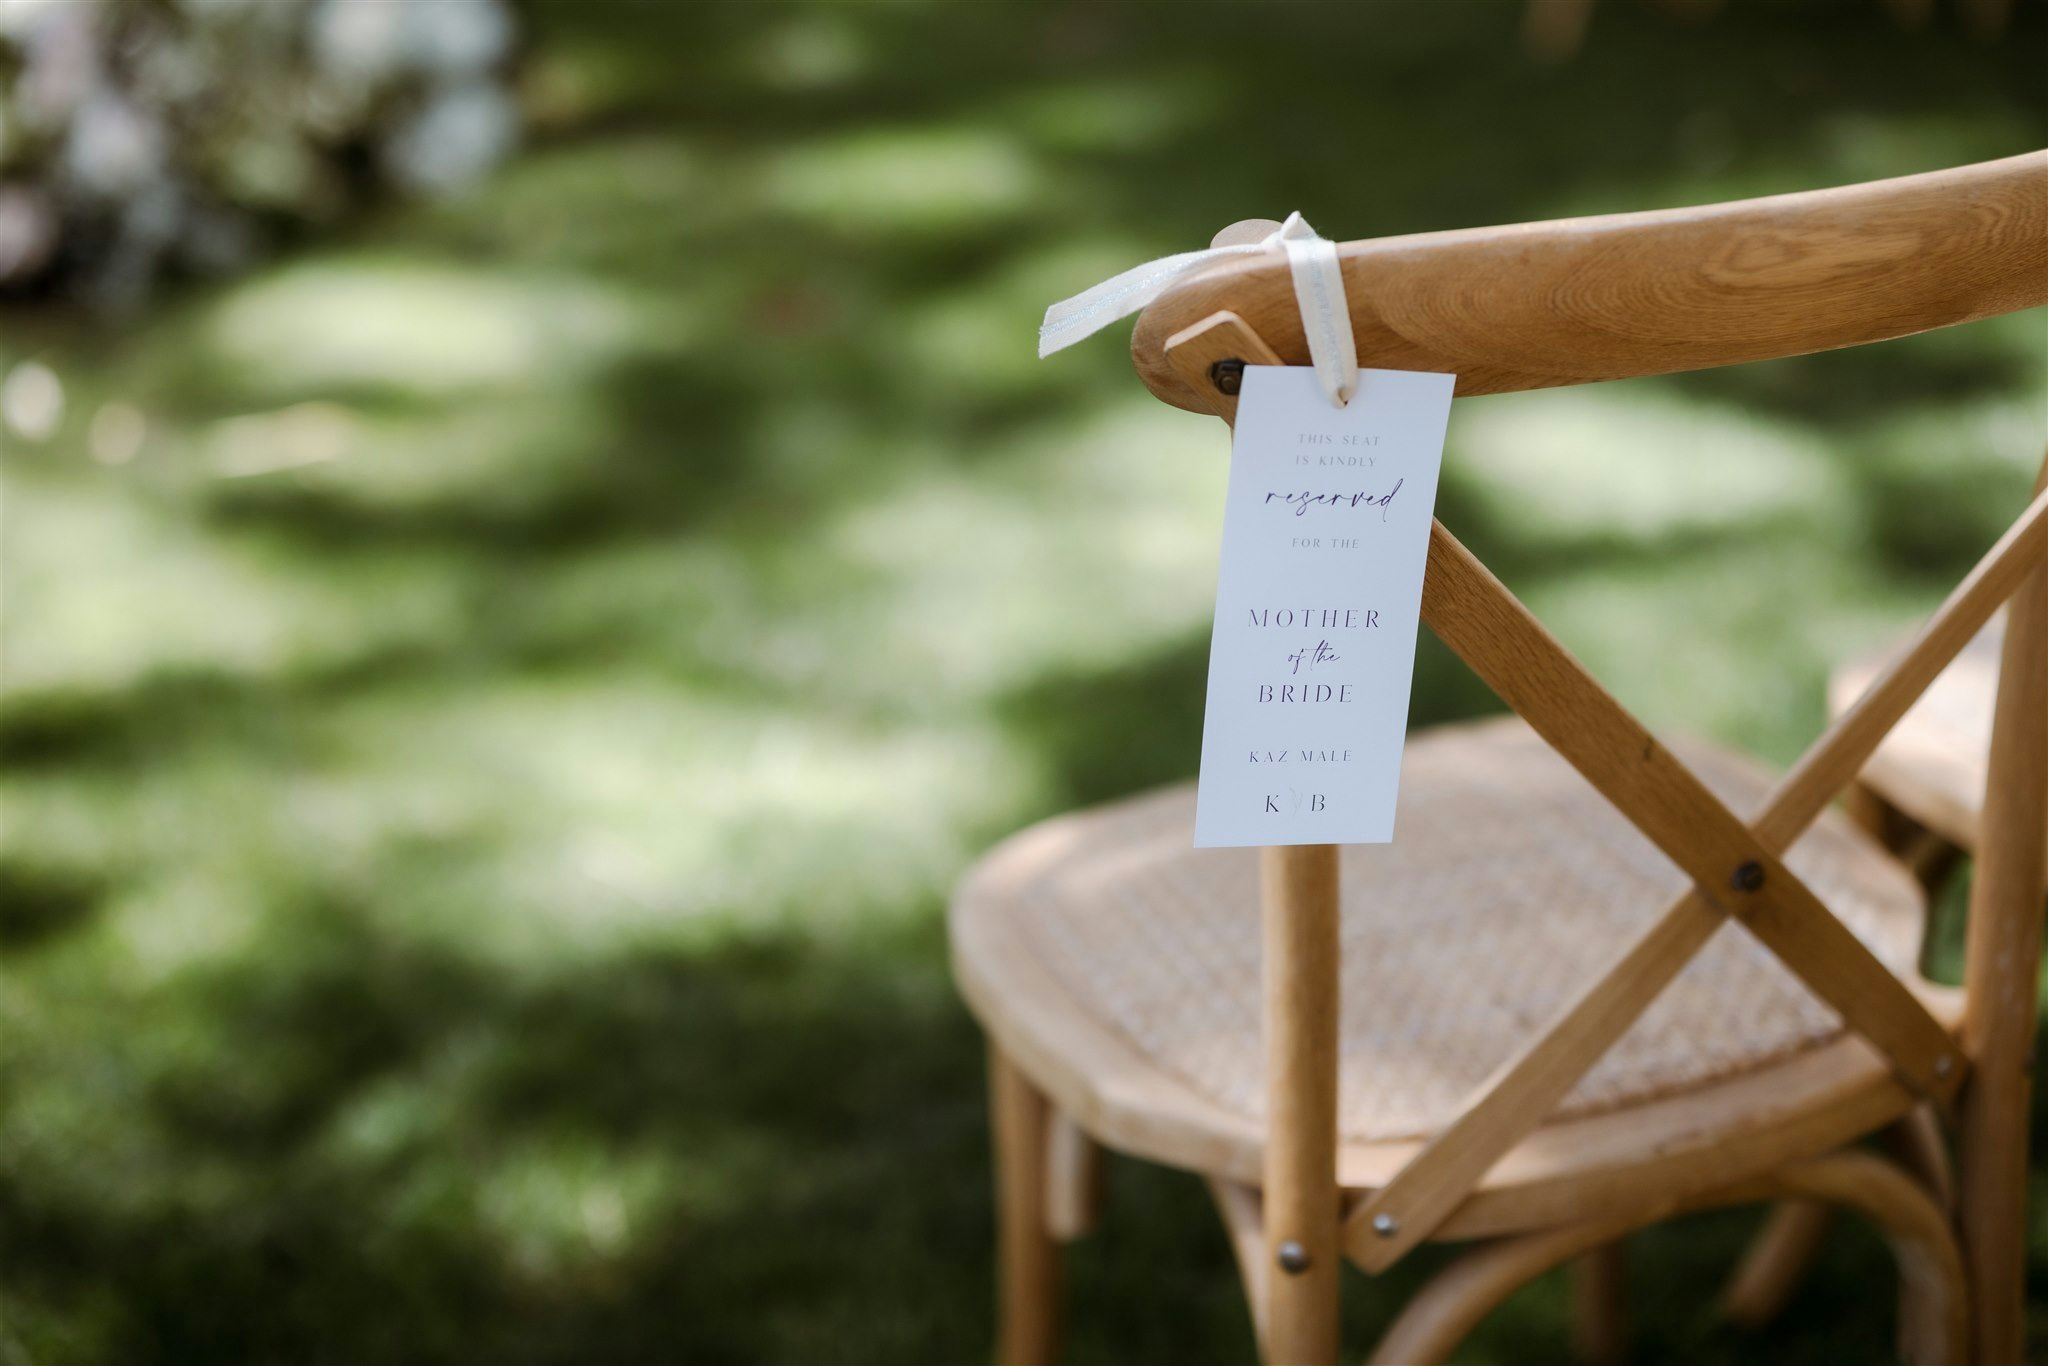 Ceremony chair with reserved sign